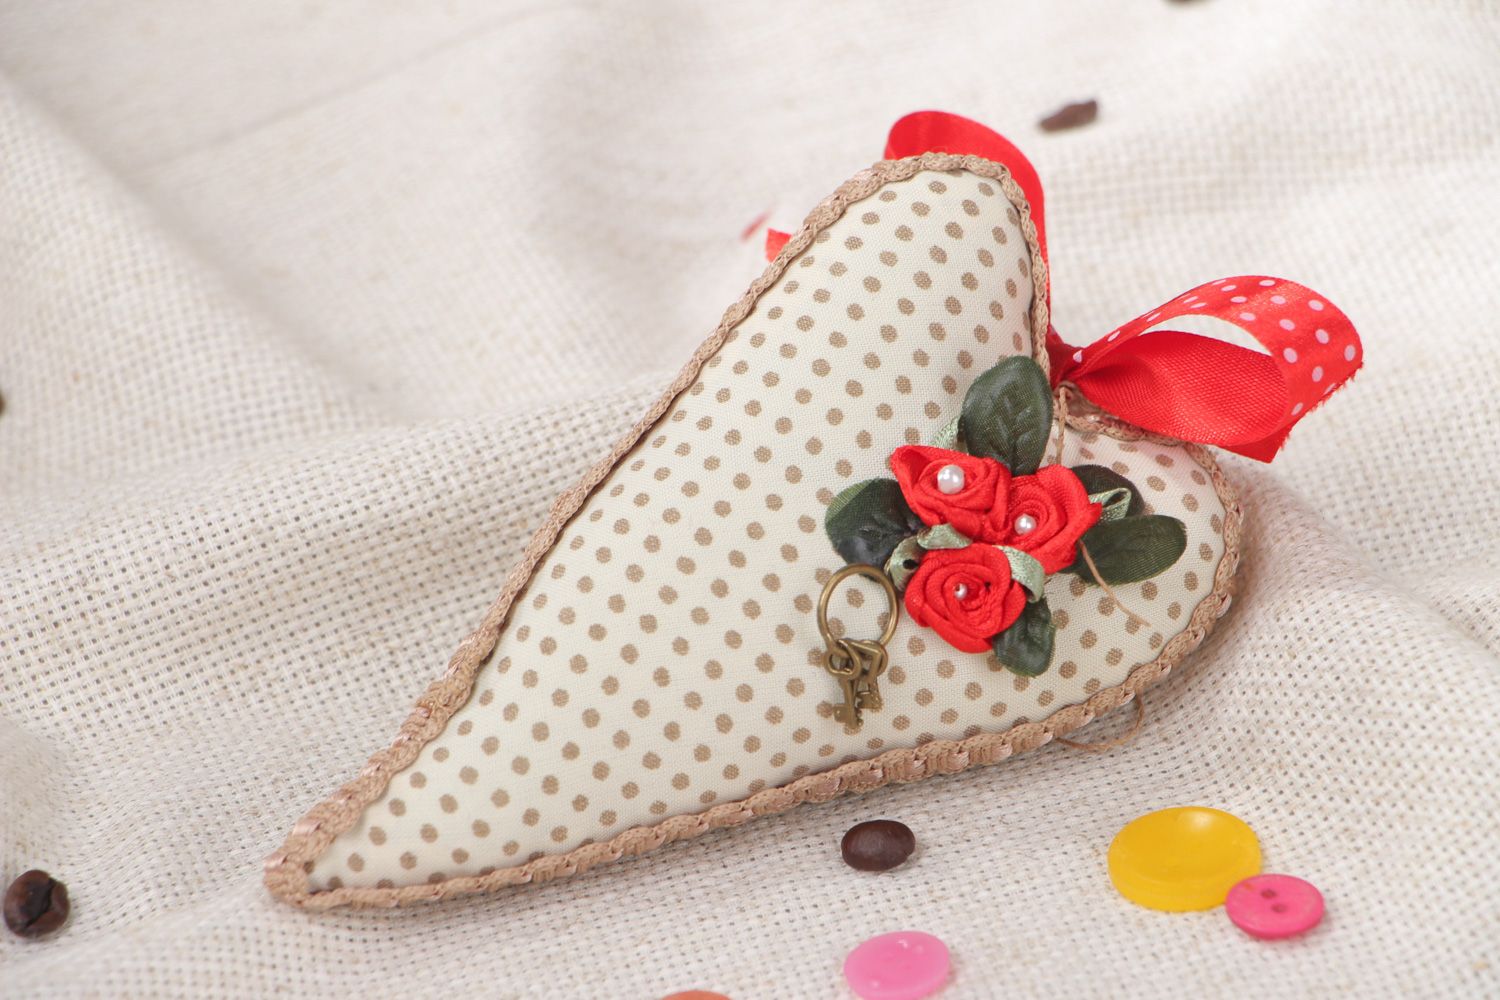 Homemade polka dot fabric interior pendant soft heart with eyelet and flowers photo 5